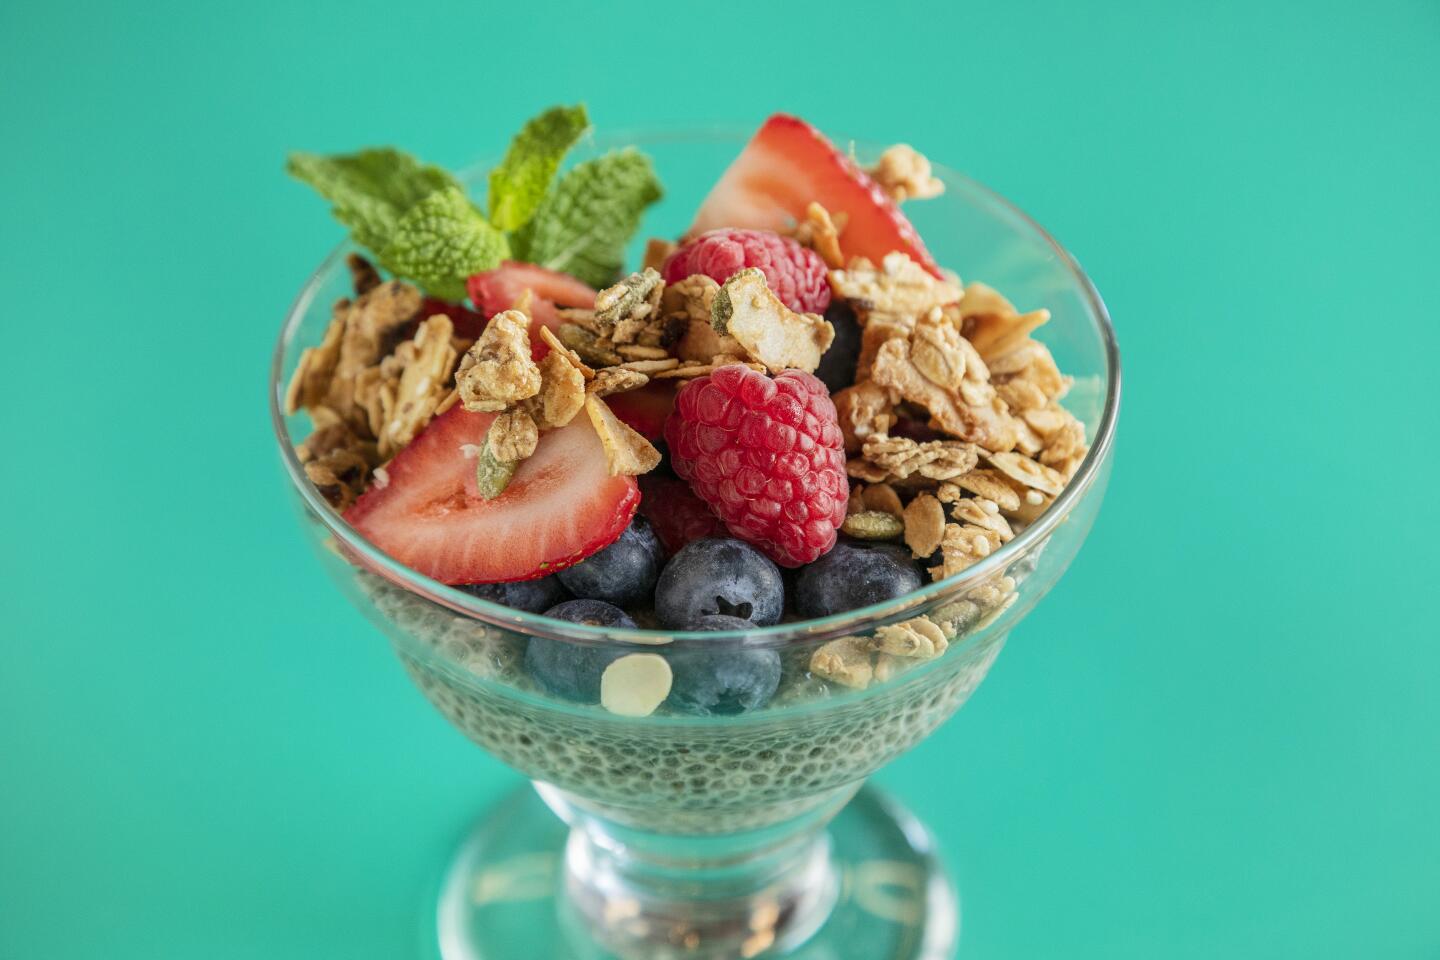 SANTA MONICA, CA - OCTOBER 21, 2019 - Breakfast granola: Sweet housemade granola (smaller bowl) - oat milk yogurt or straus yogurt with chia passion fruit and berries, at Socalo, a soon to be open Mexican restaurant in Santa Monica, October 21, 2019. (Ricardo DeAratanha / Los Angeles Times)